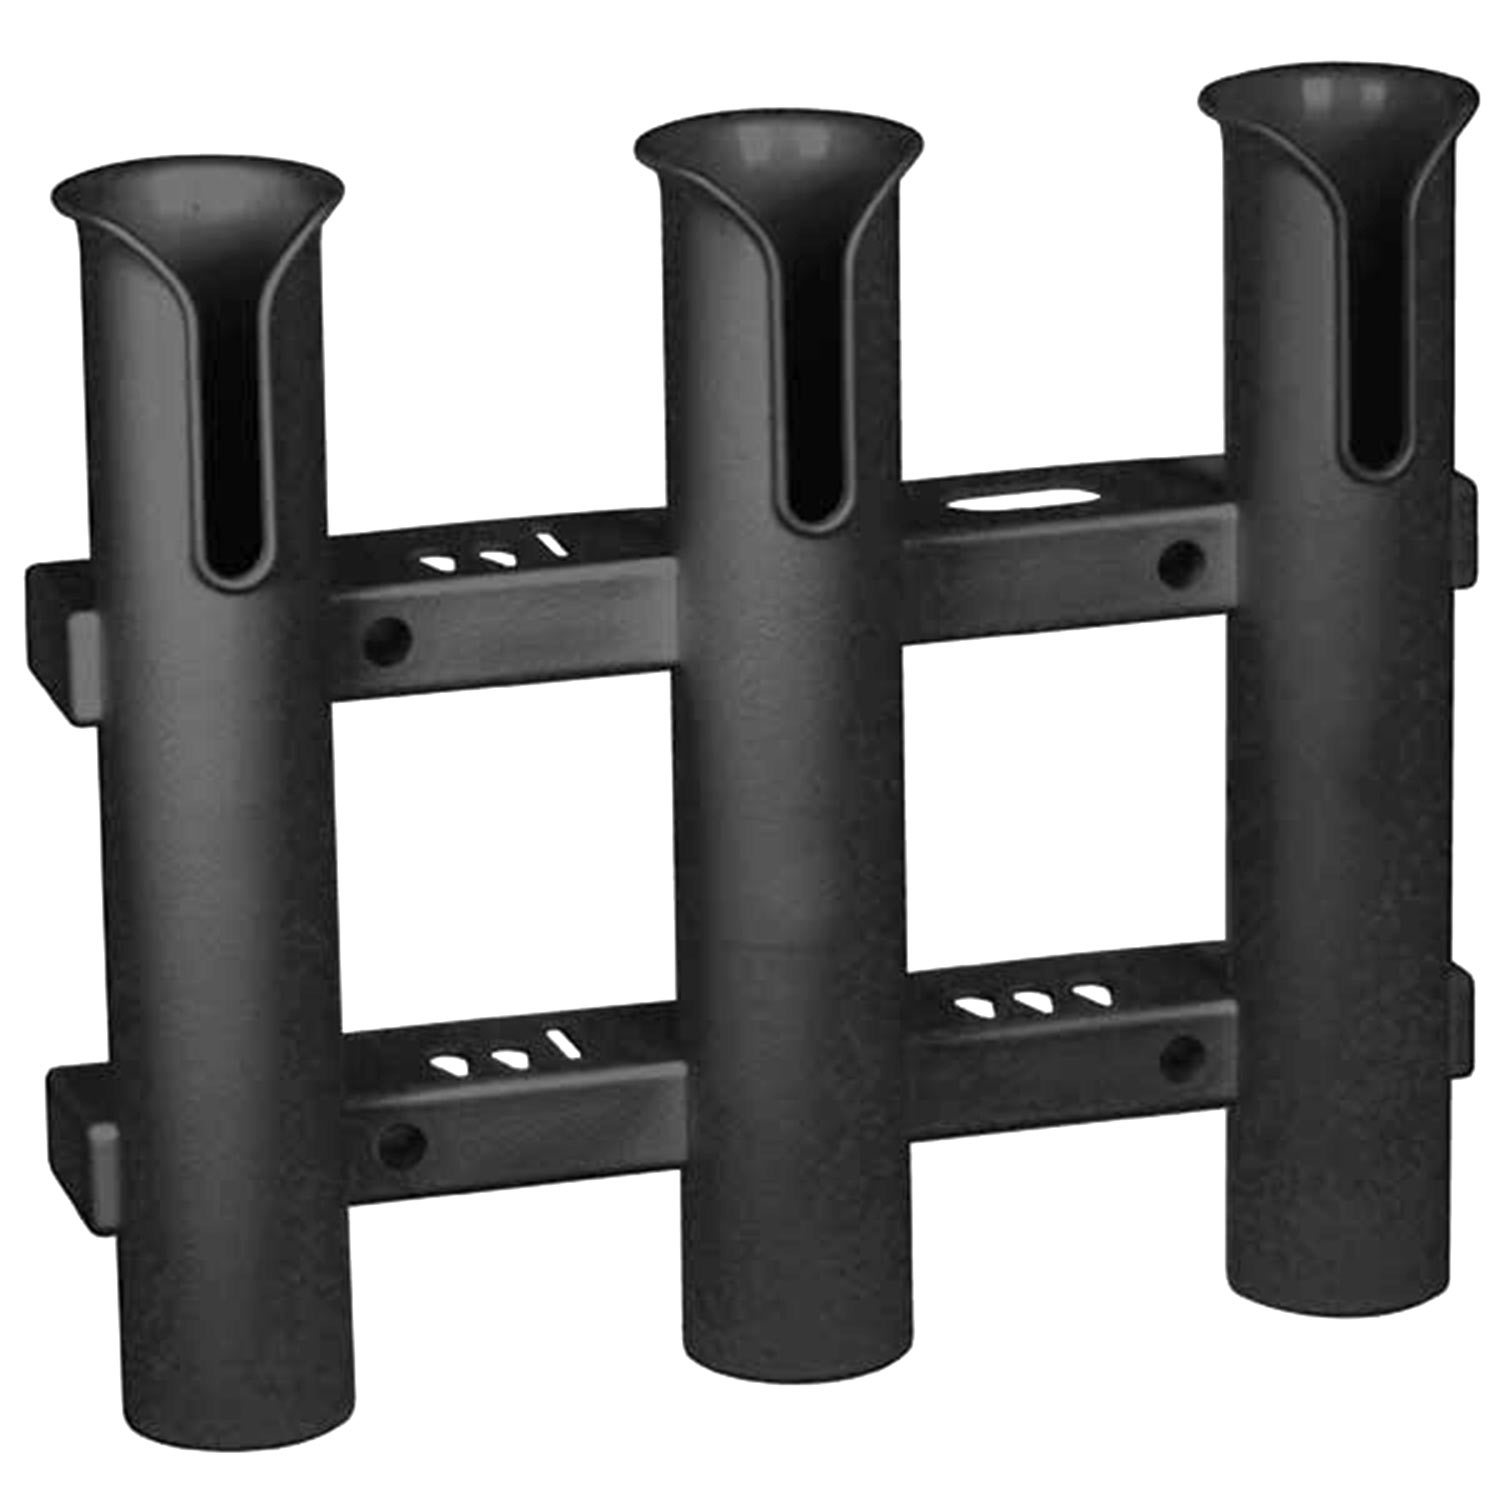 ROD HOLDER PLASTIC BLACK 4 PAC 89270 FISHING ROD POLE HOLDERS BOATINGM –  Boat Parts and more